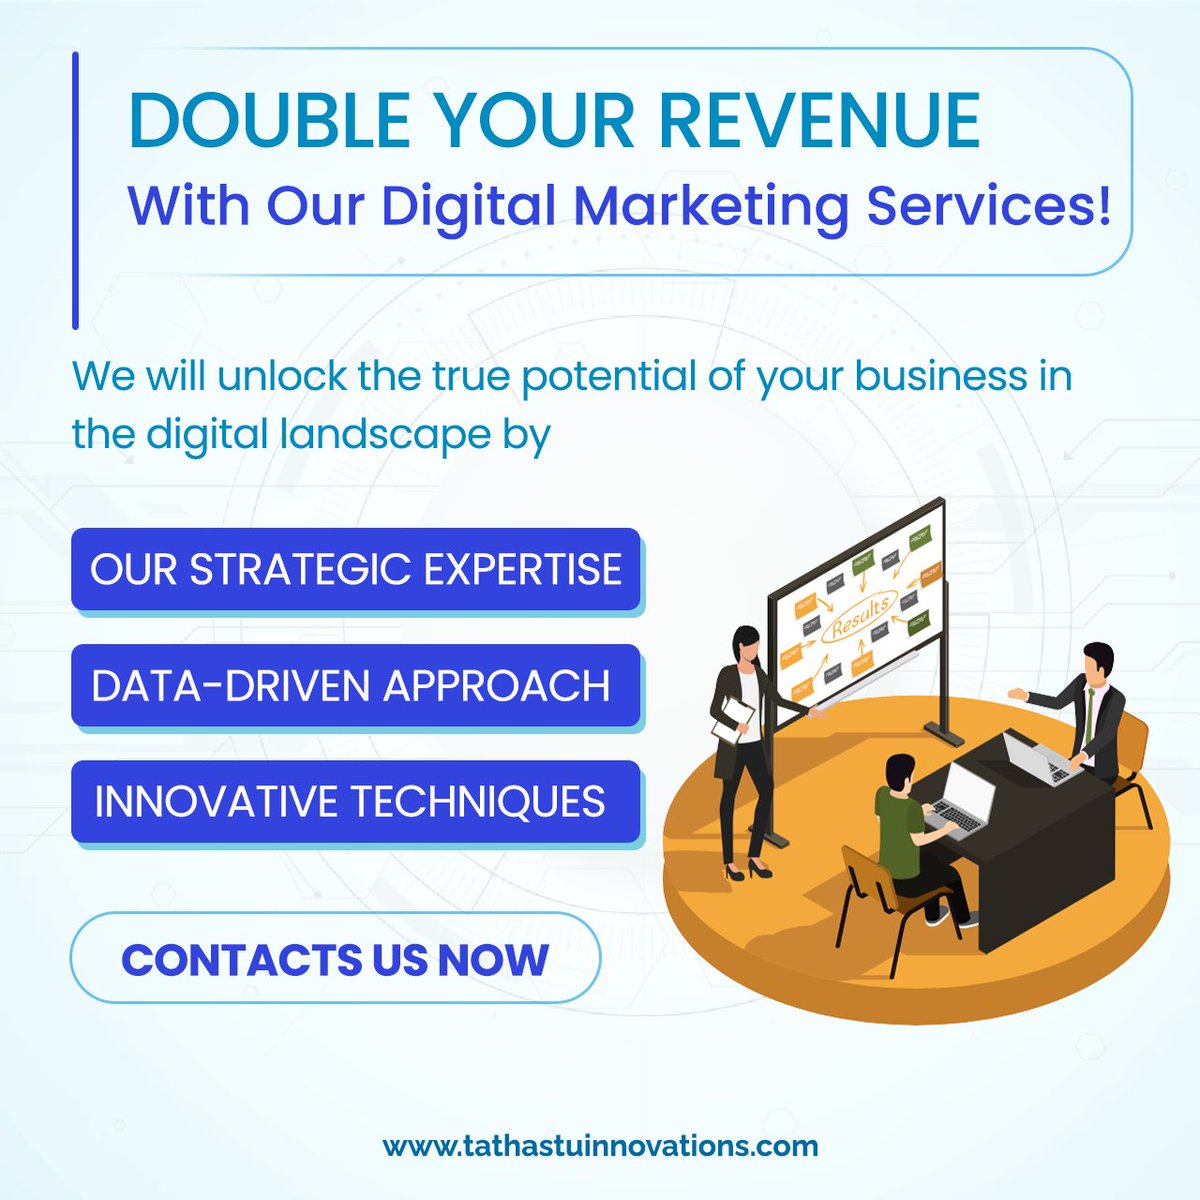 Double your revenue & stay ahead of the competition. Contact us now & let's discuss how we can double your revenue together! 
Visit us: tathastuinnovations.com  
 +91 90348 89088

#DoubleYourRevenue #StayAhead #DigitalMarketing #TI #BusinessGrowth #RevenueBoost #DigitalAdvantage